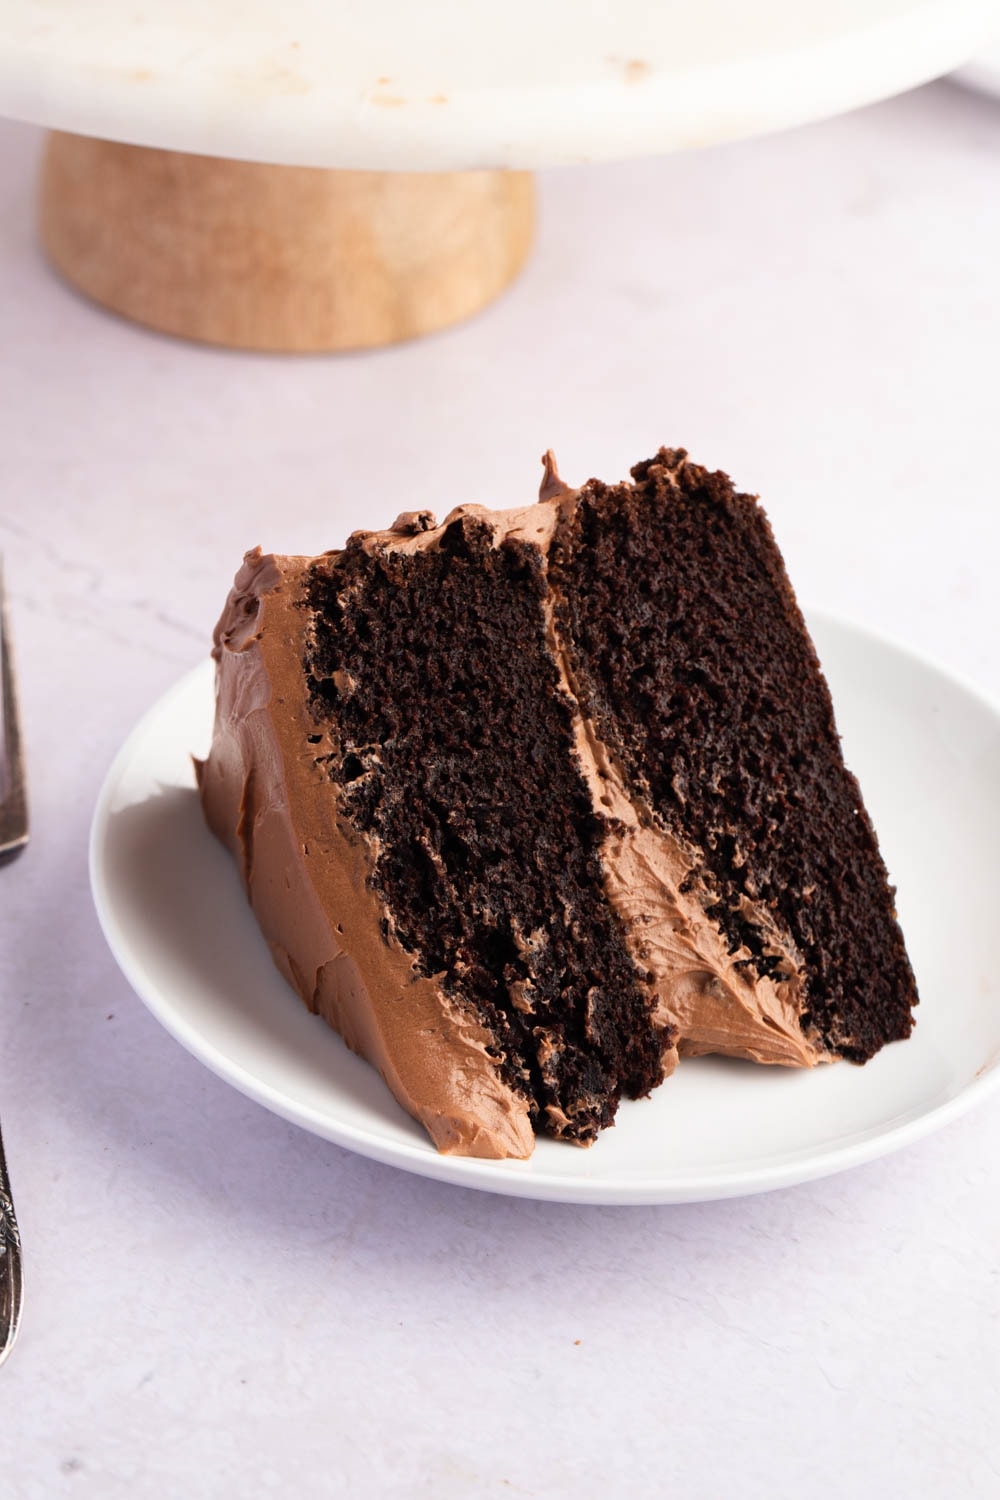 A Sliced of Ina Garten's Chocolate Cake,   With Chocolate Buttercream Filling and Frosting